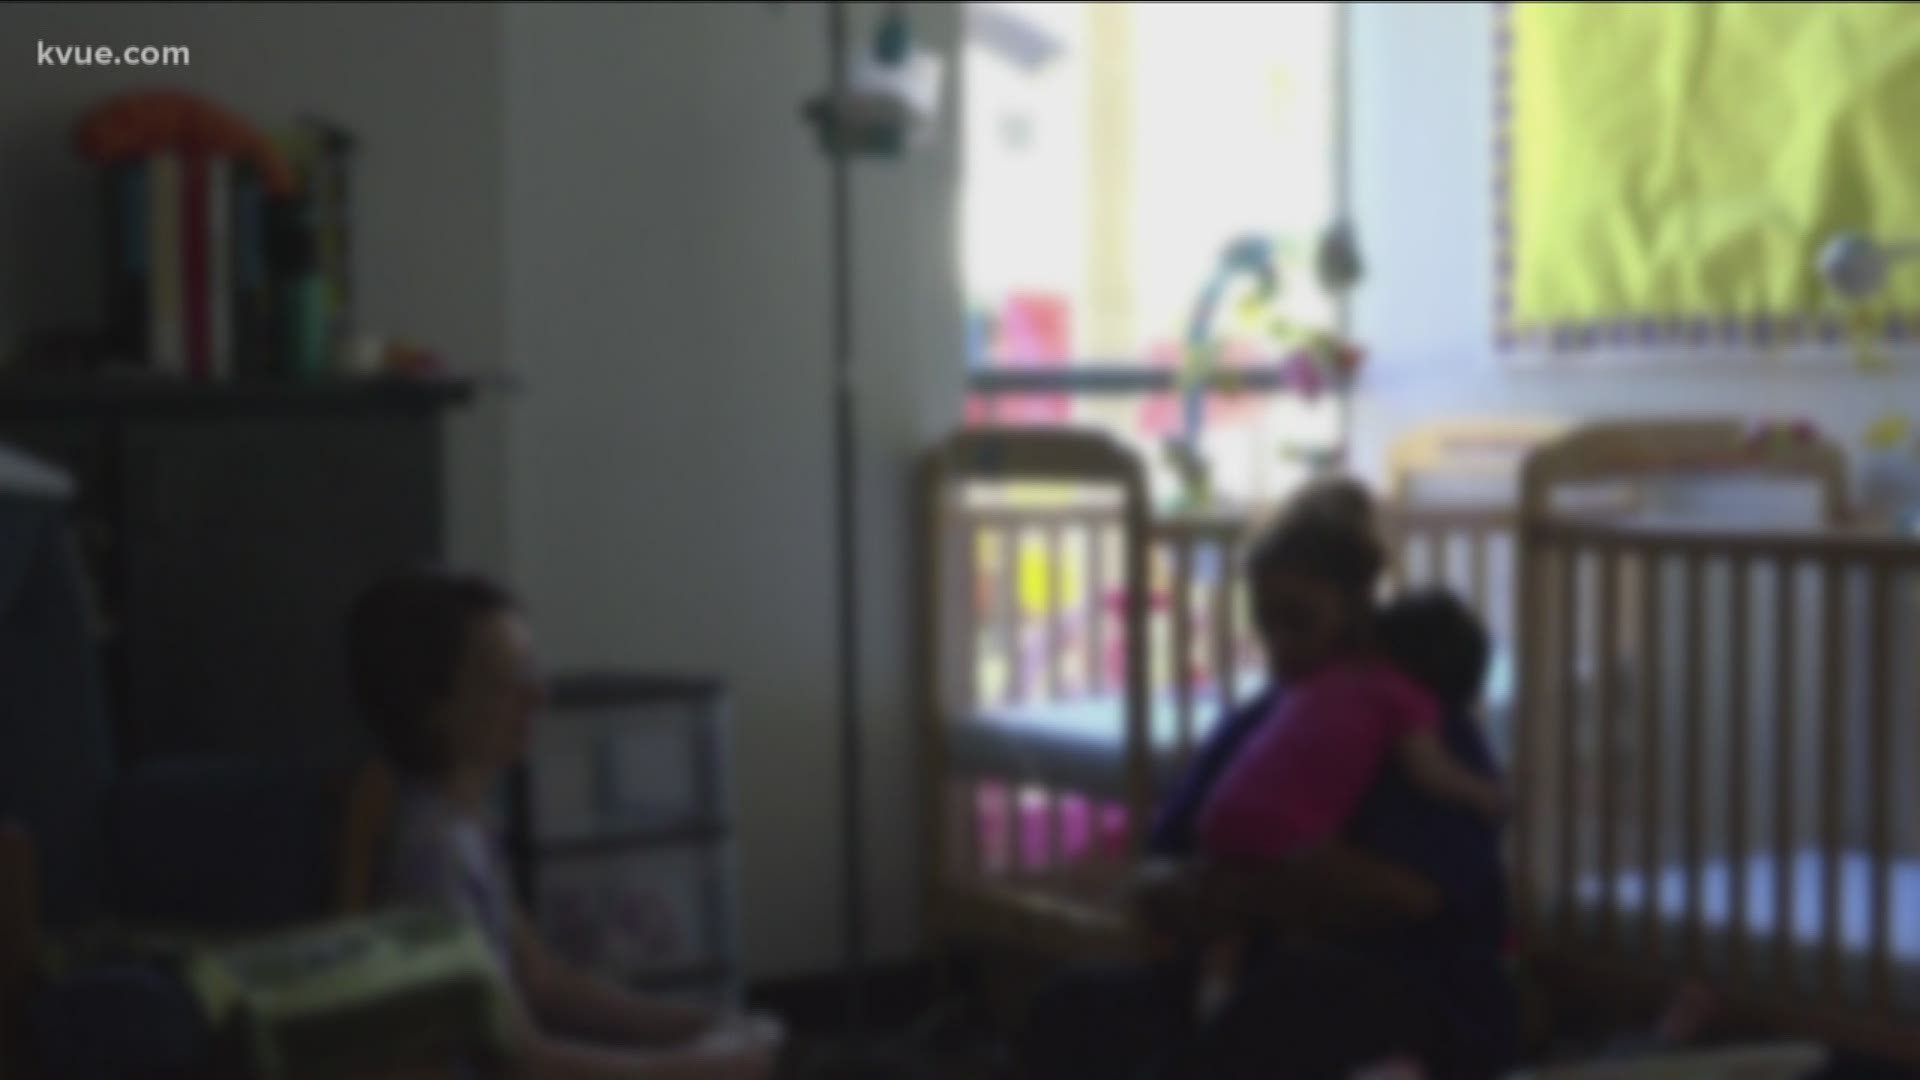 Ninety Texas children have died in daycare since 2007 and thousands of others were abused. Now, Texas lawmakers are trying to pass legislation to stop it, with more oversight and better standards at daycares across the state.